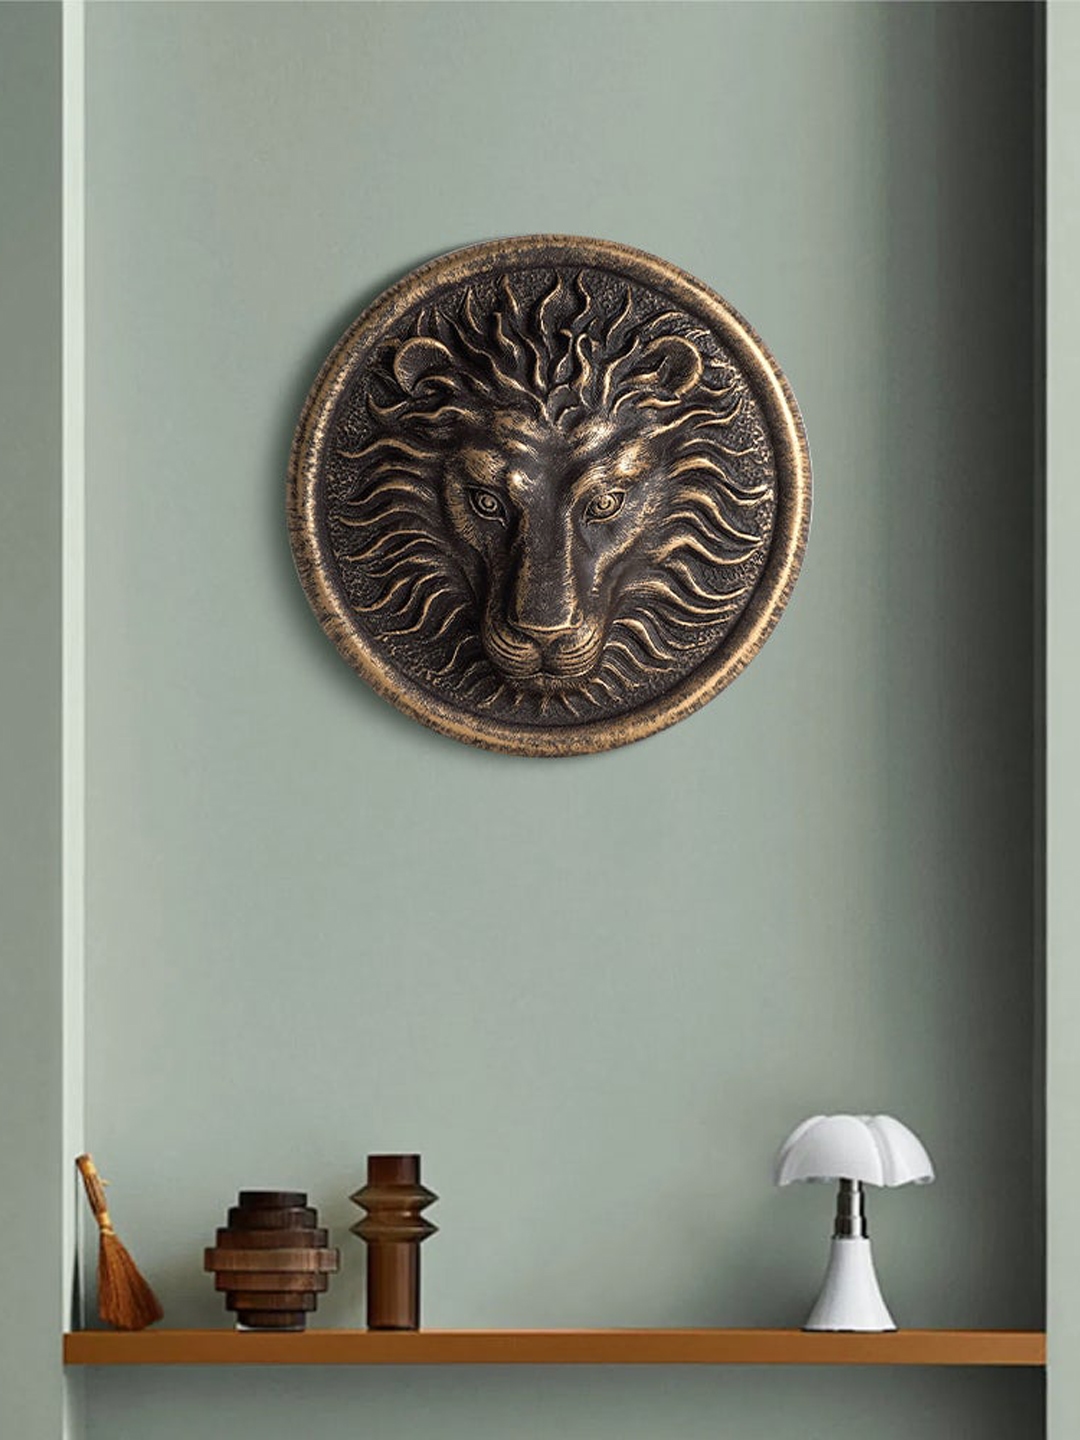 THE ARTMENT Gold-Toned Surreal Lion Head Wall Art